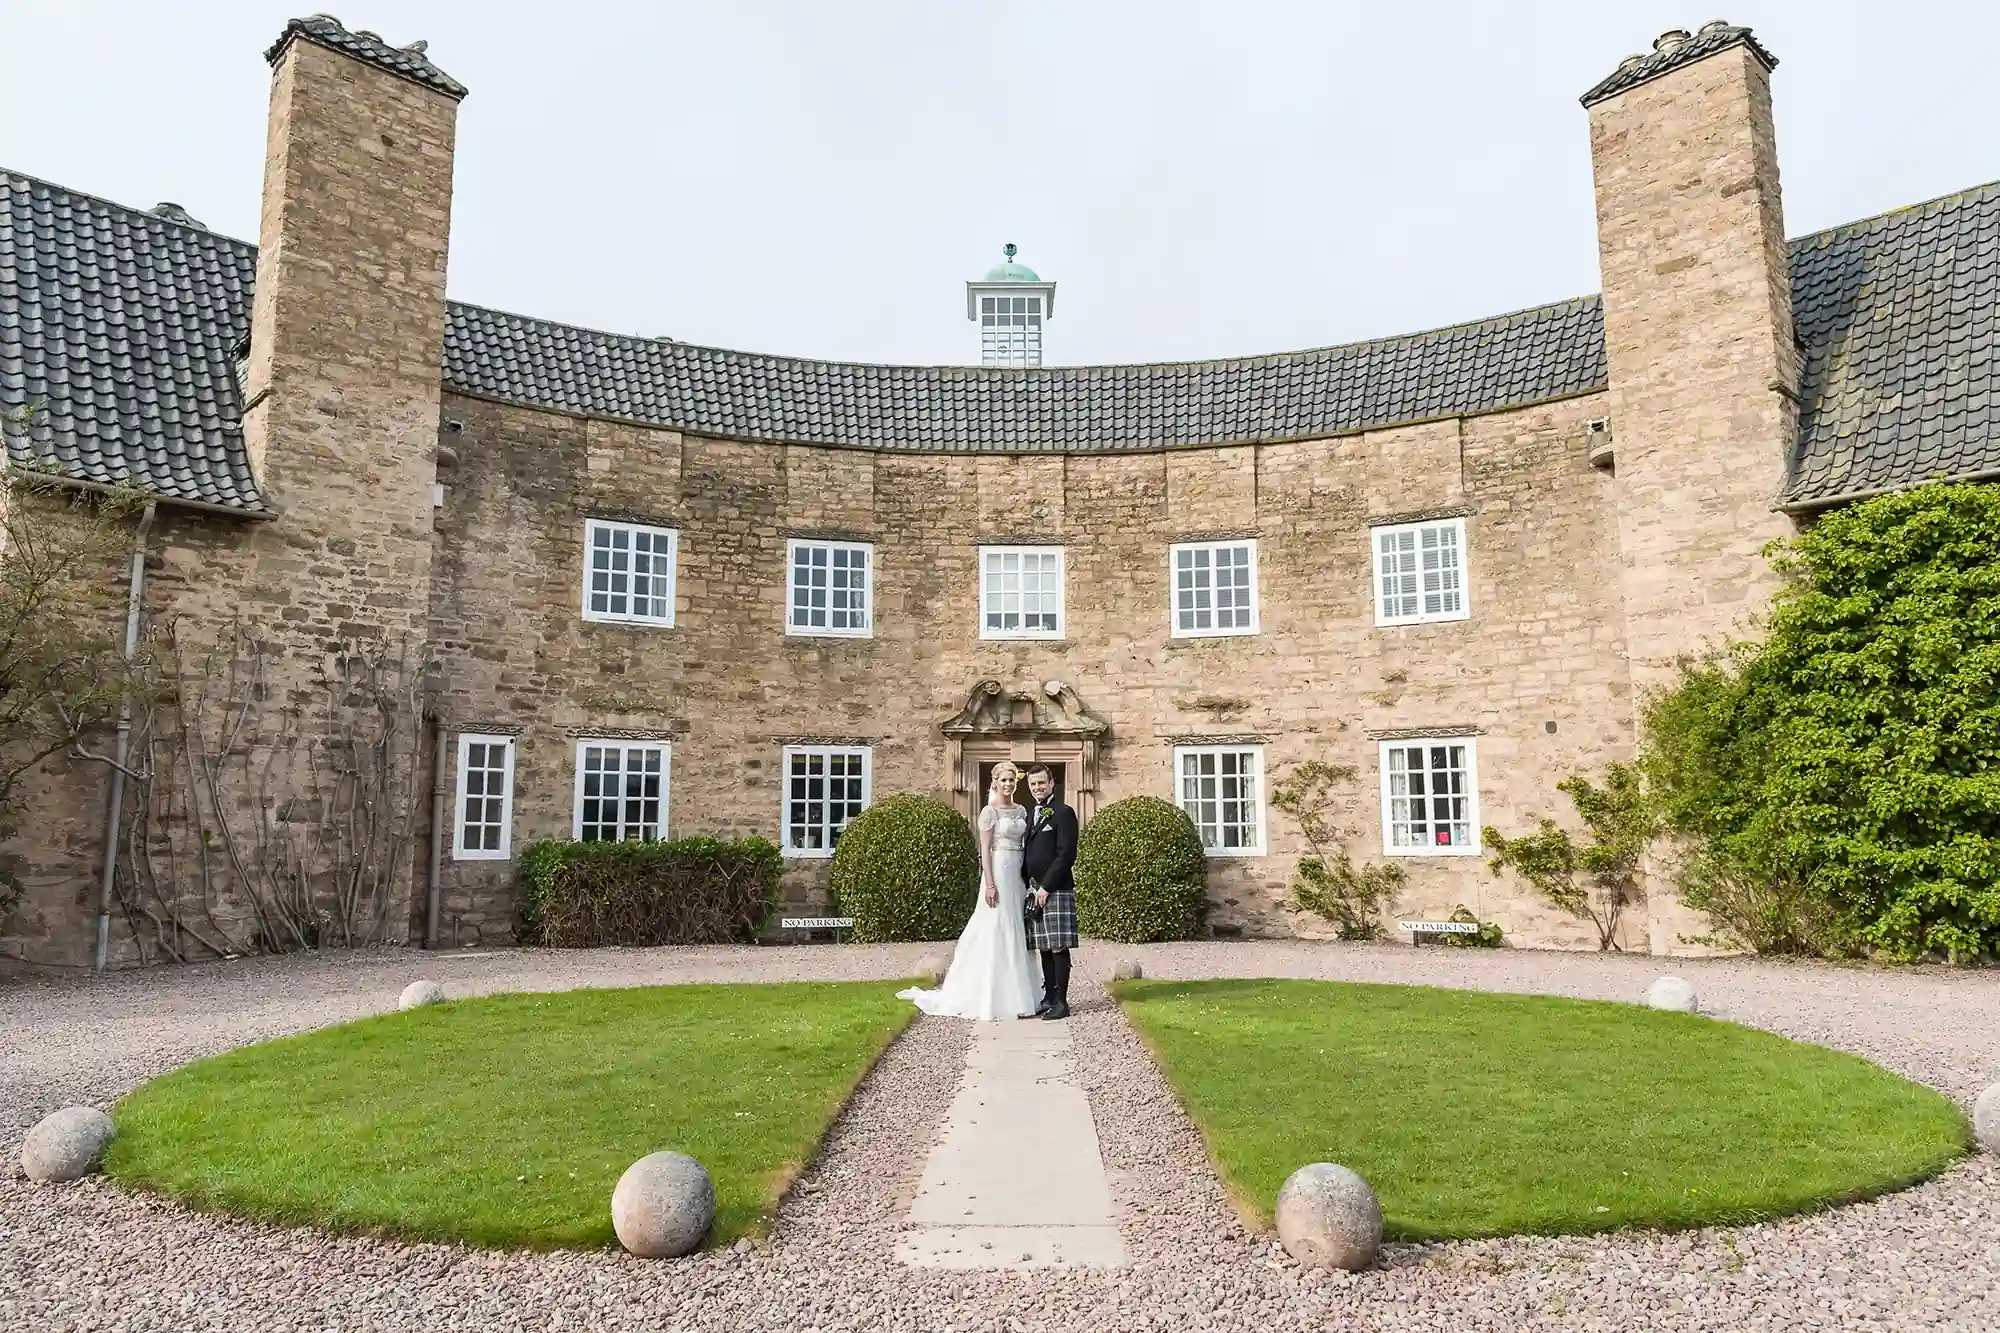 A bride and groom holding hands in front of a large, historic stone building with a green lawn and symmetrical gravel pathway.